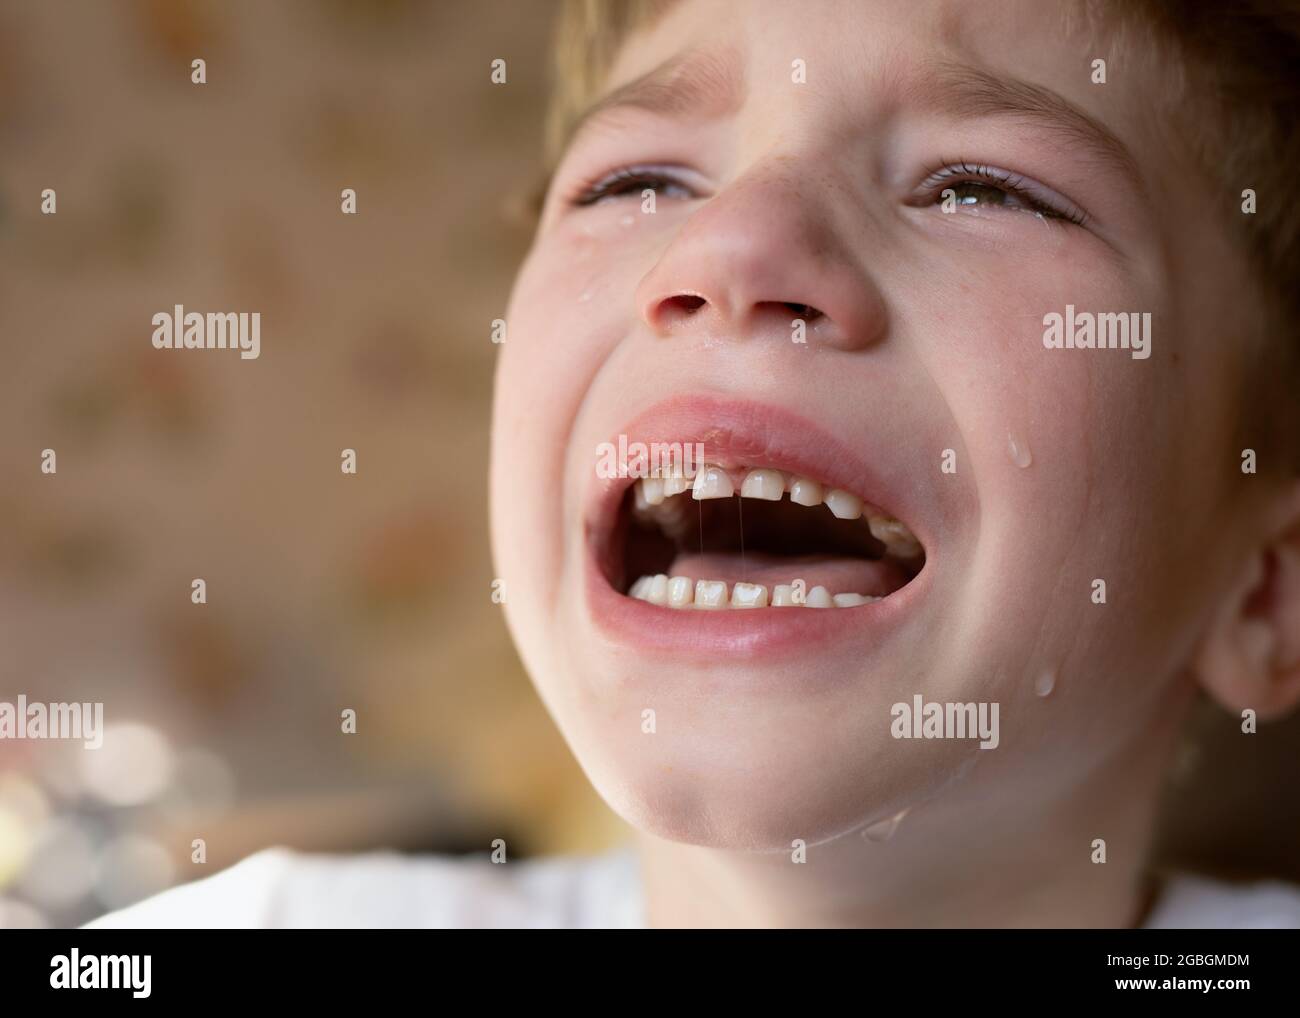 crying kids faces